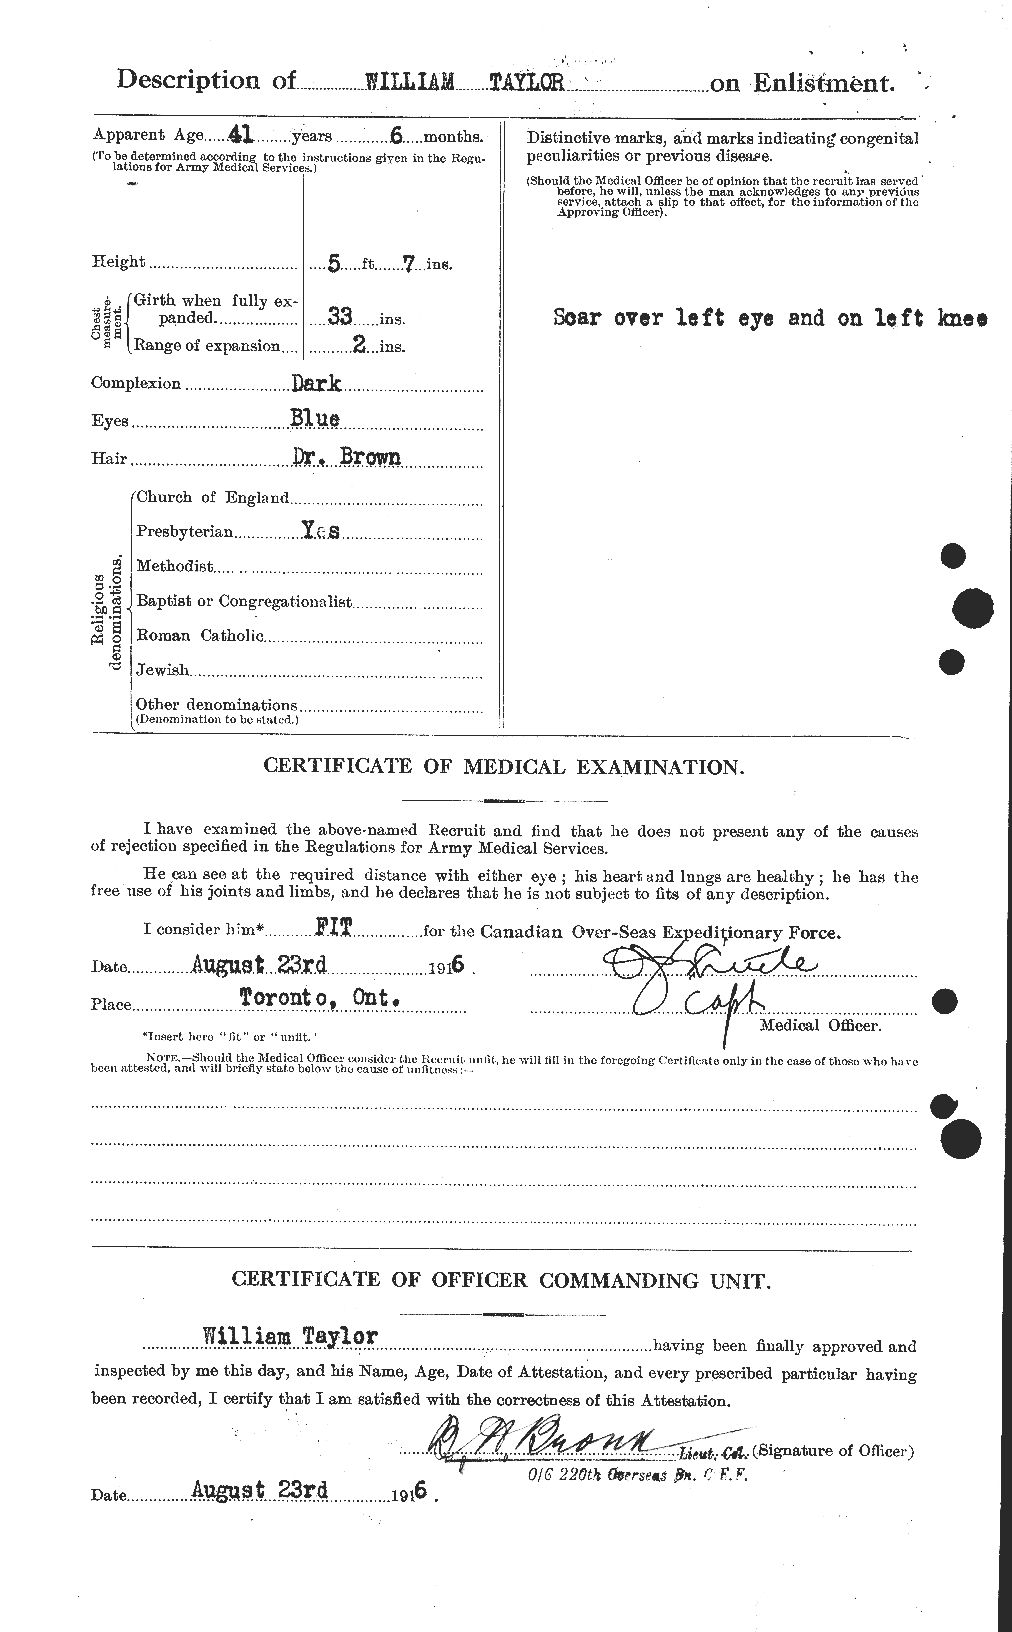 Personnel Records of the First World War - CEF 628123b